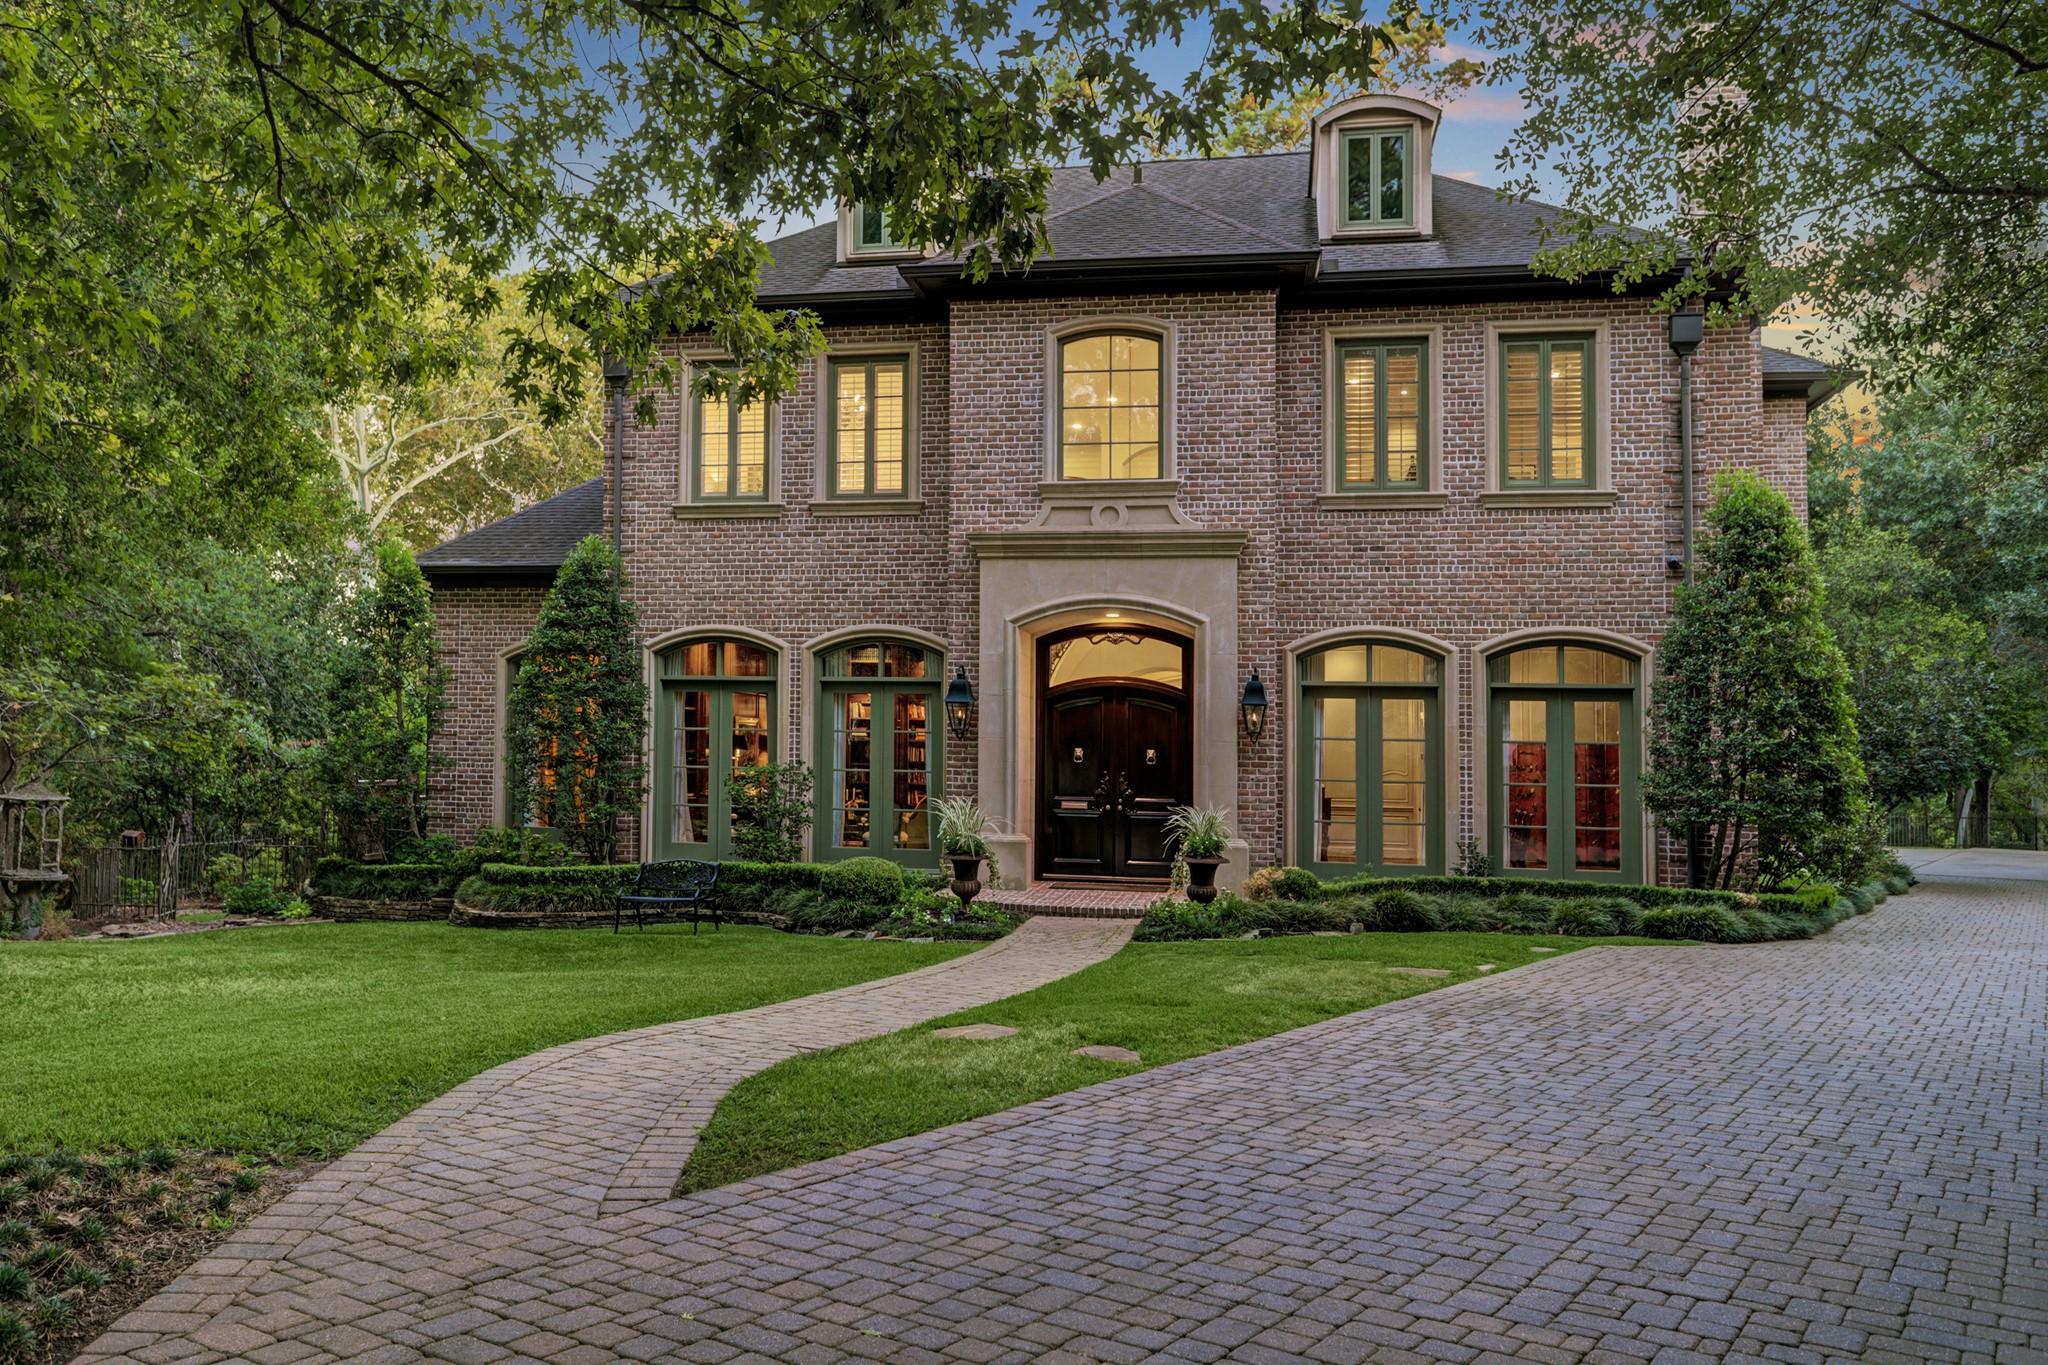 Exquisite custom estate in Sandalwood situated on a gorgeous, wooded 107,439 sq ft lot.